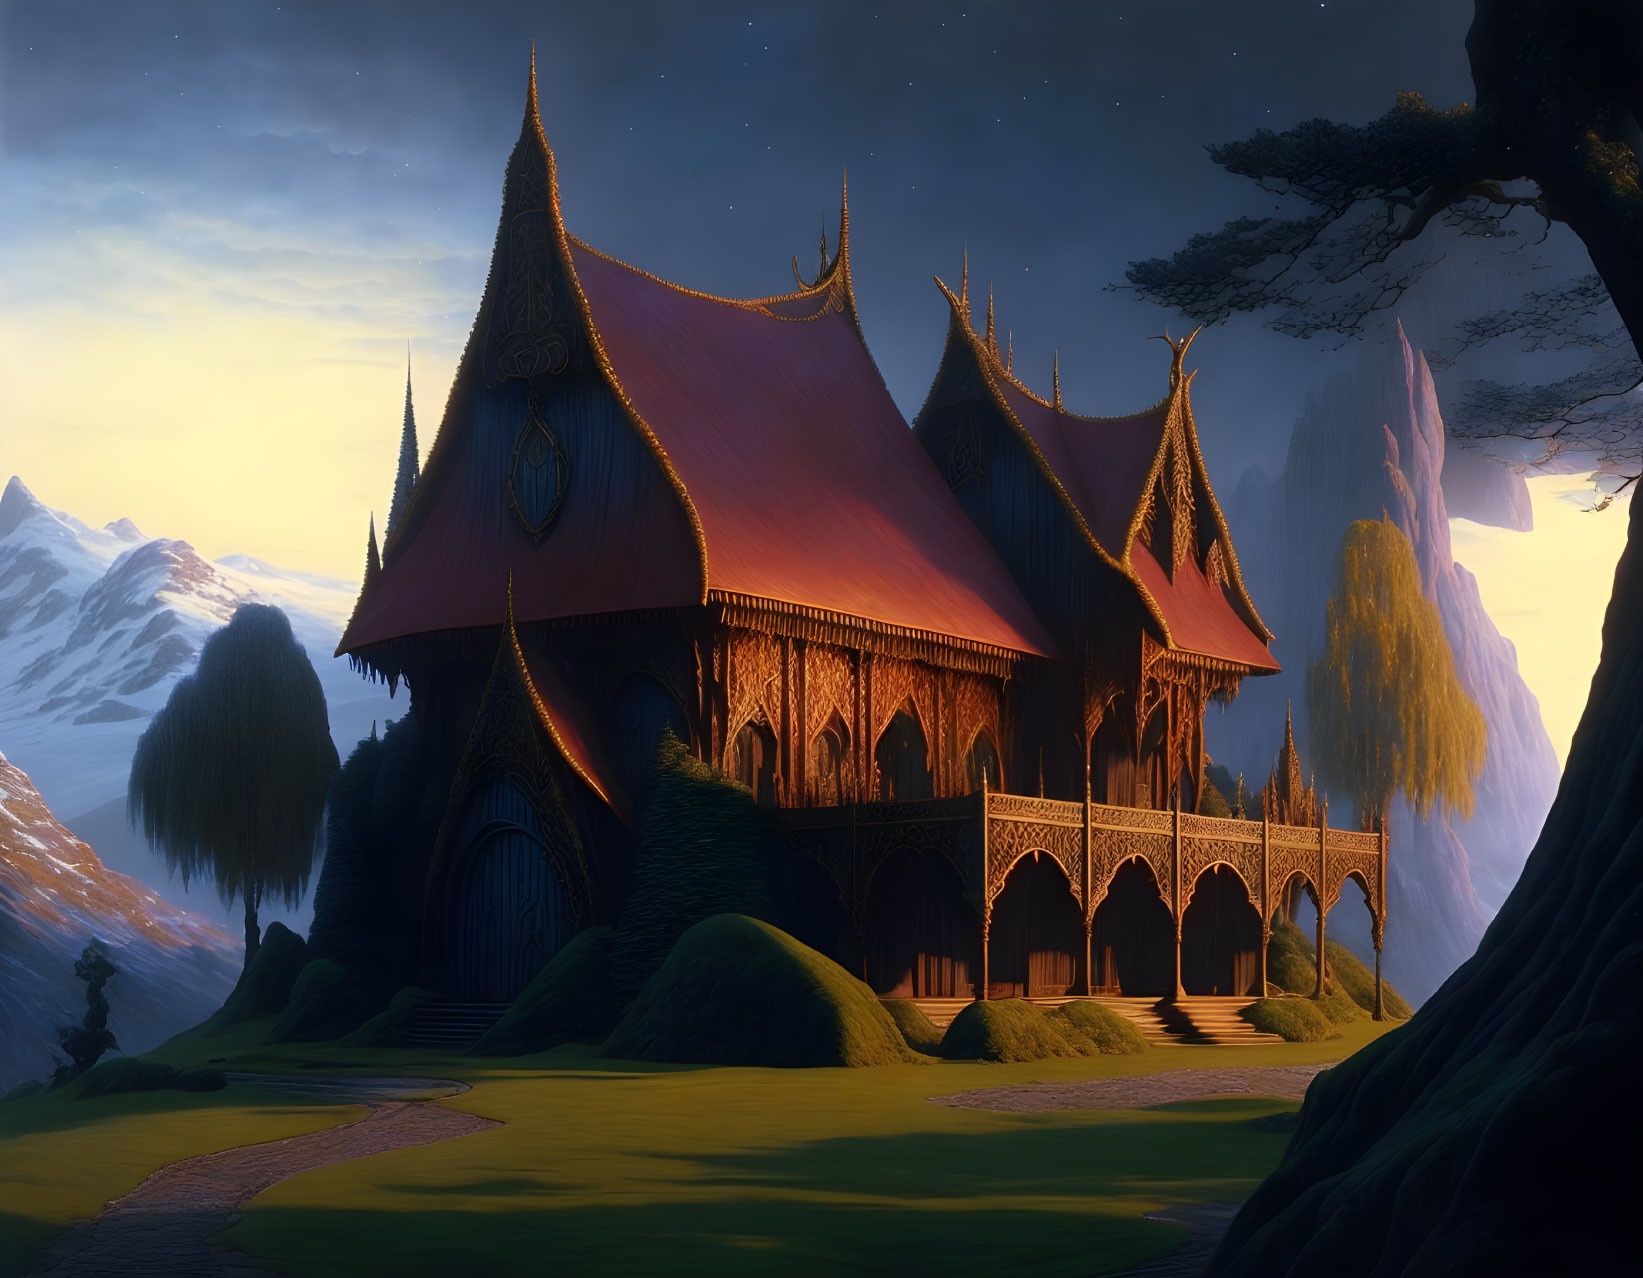 Majestic fantasy castle at twilight with glowing windows and mountain backdrop